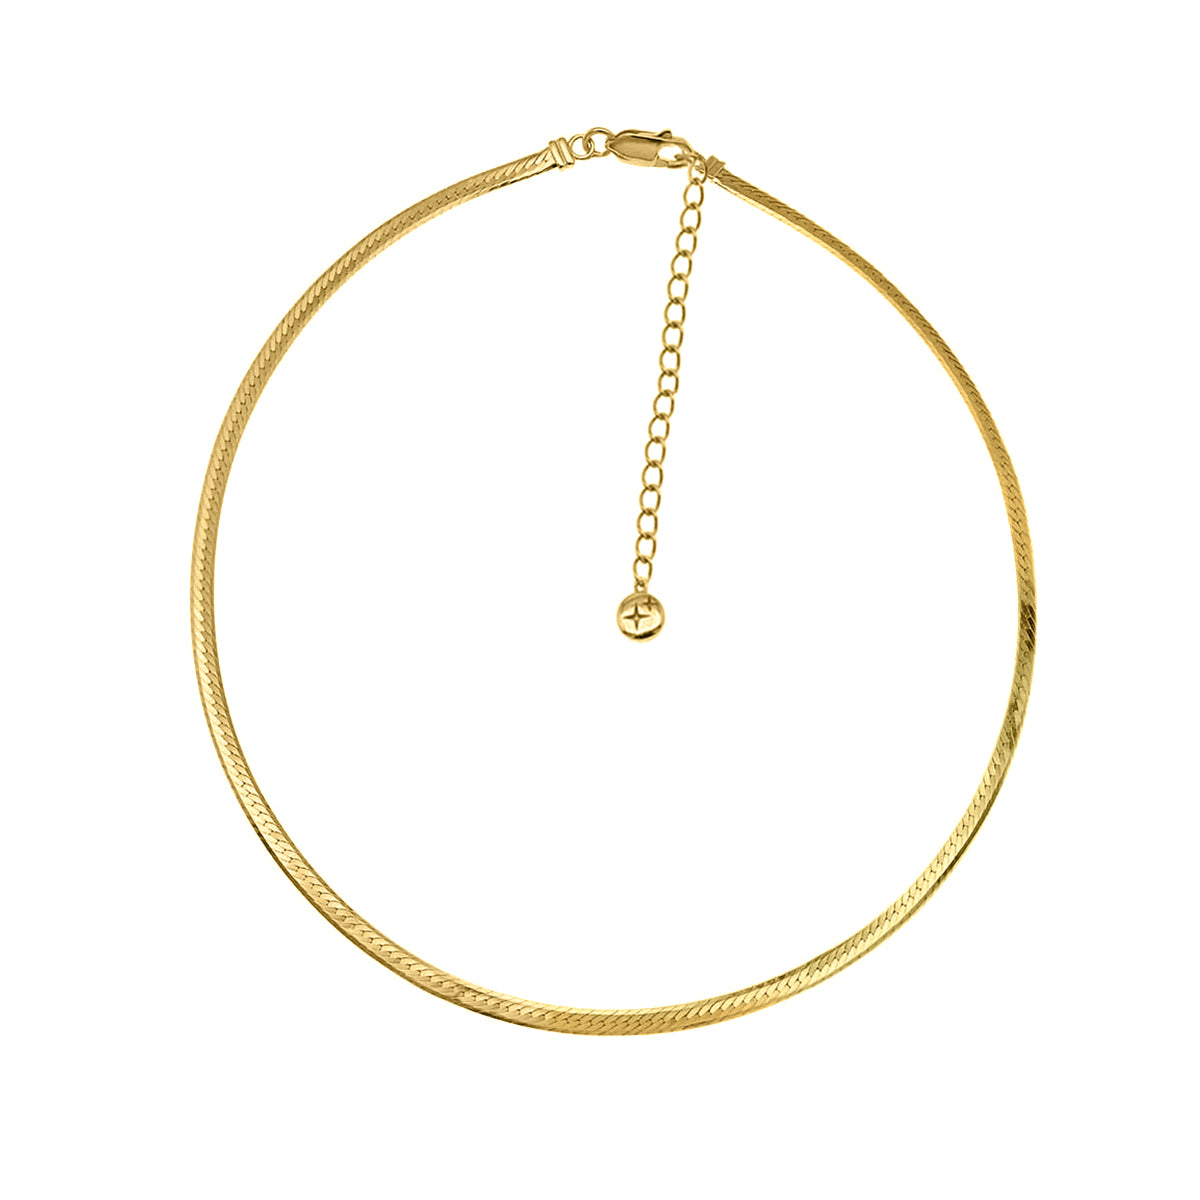 Herringbone Necklace 18ct Gold Plated